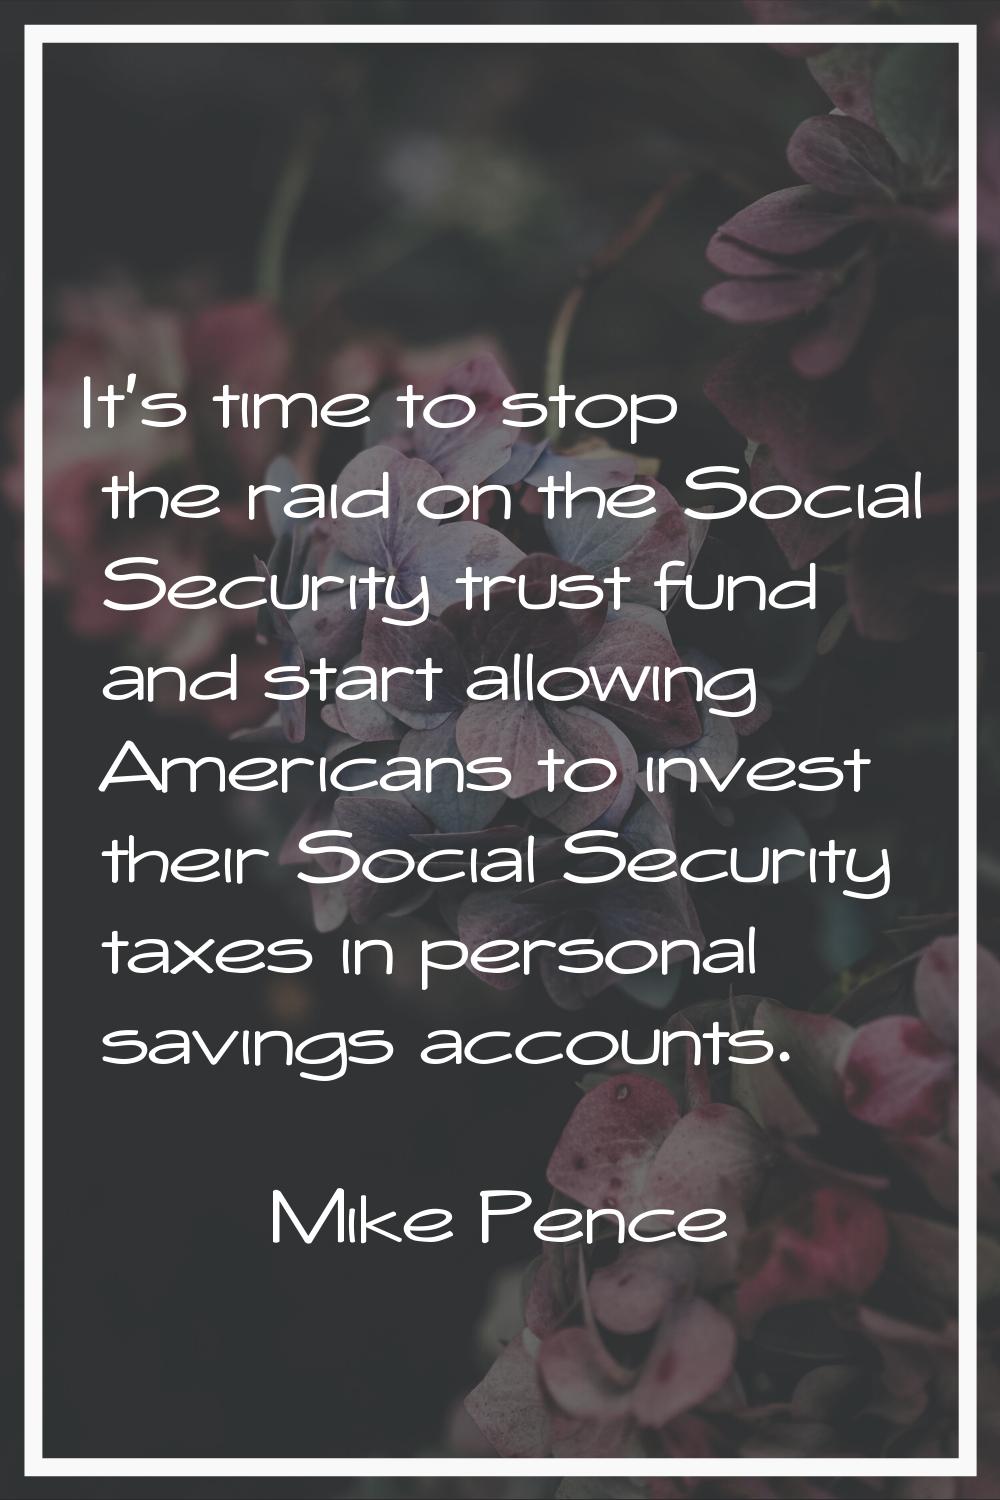 It's time to stop the raid on the Social Security trust fund and start allowing Americans to invest